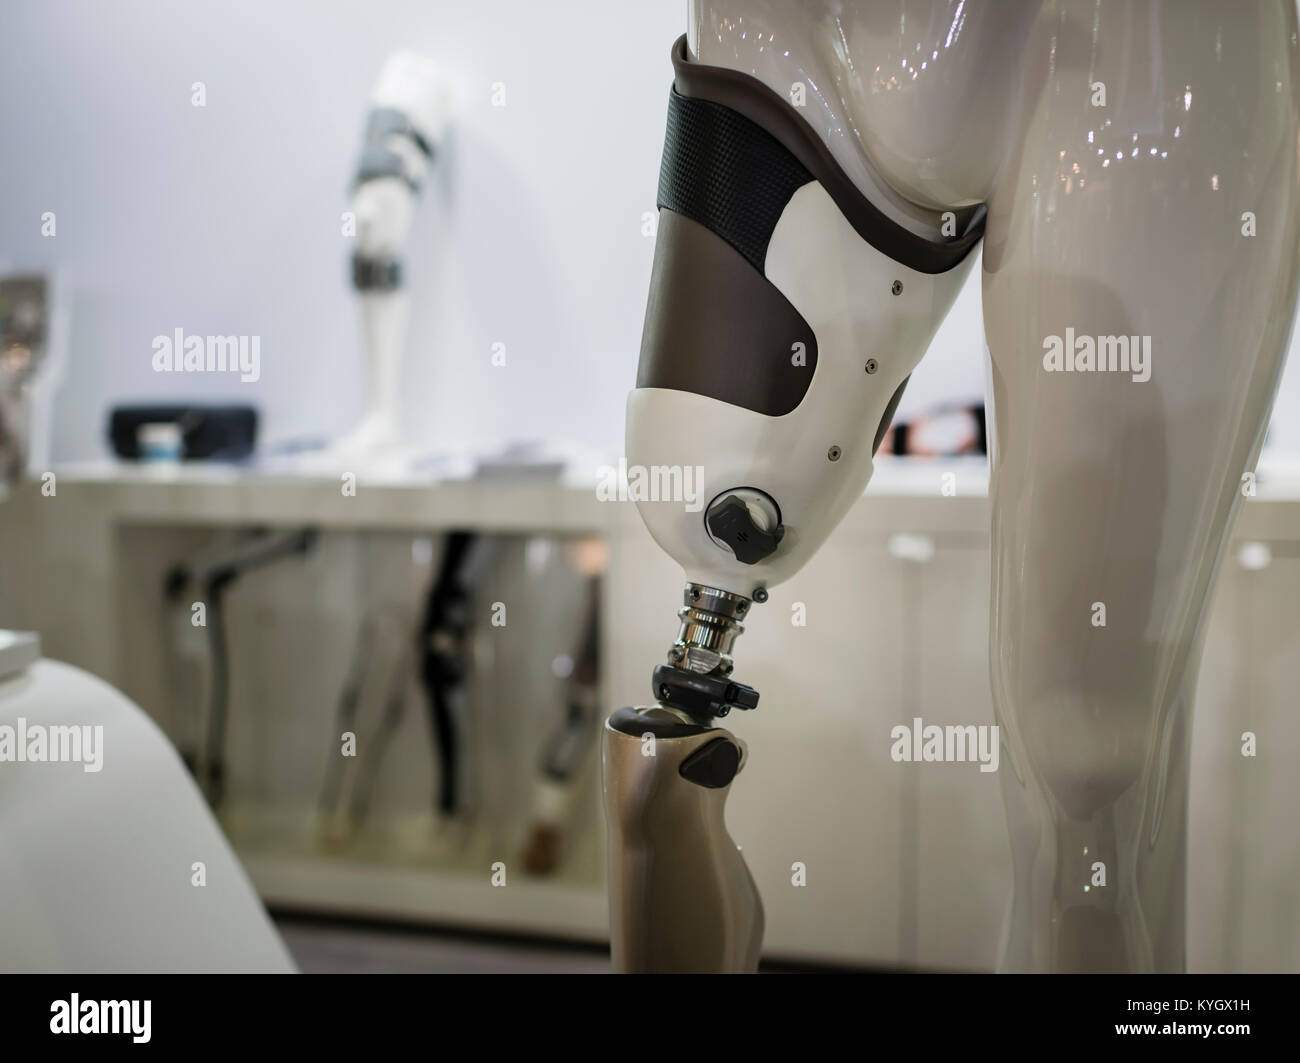 Lucerne, Switzerland - 2 Dec 2017: A variety of leg braces and prostheses shown at an exhibition booth during Swiss Handicap fair in Lucerne. Stock Photo